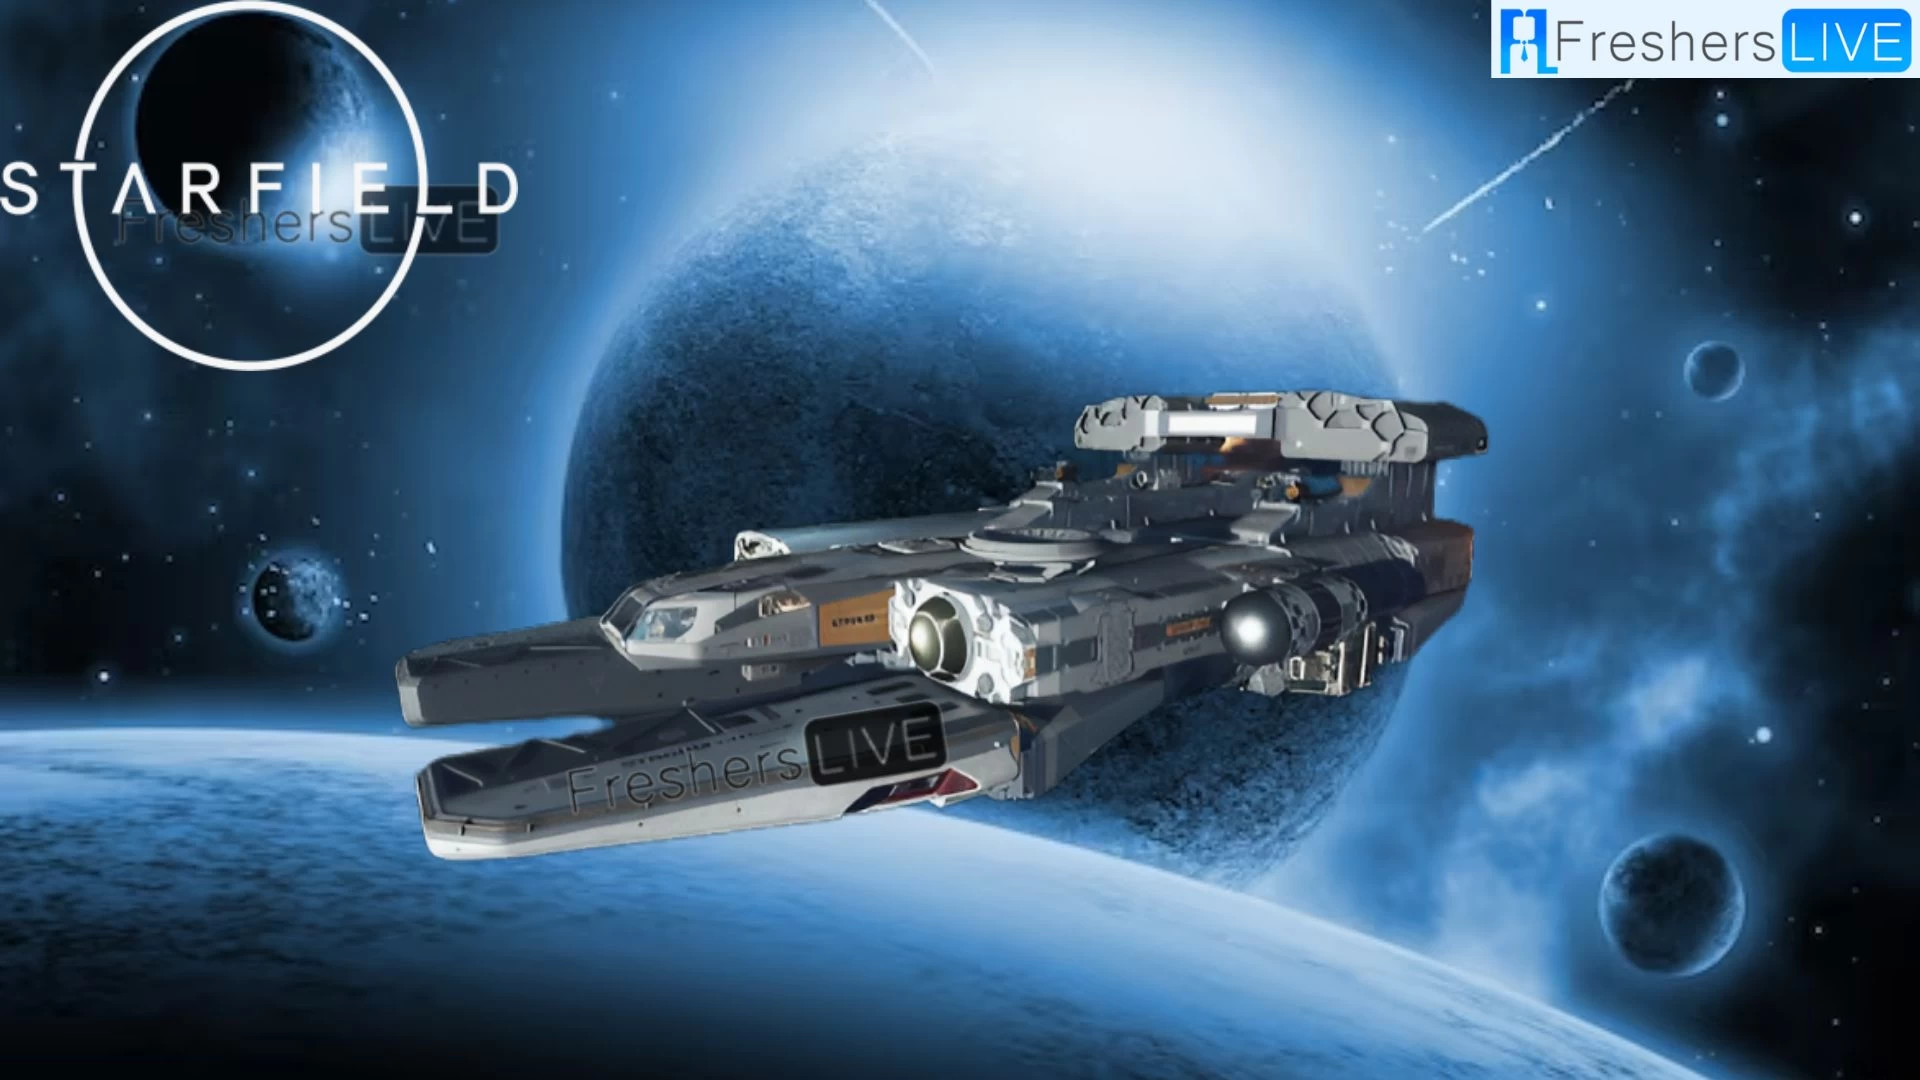 How to Change Ships Starfield? A Step-by-Step Guide